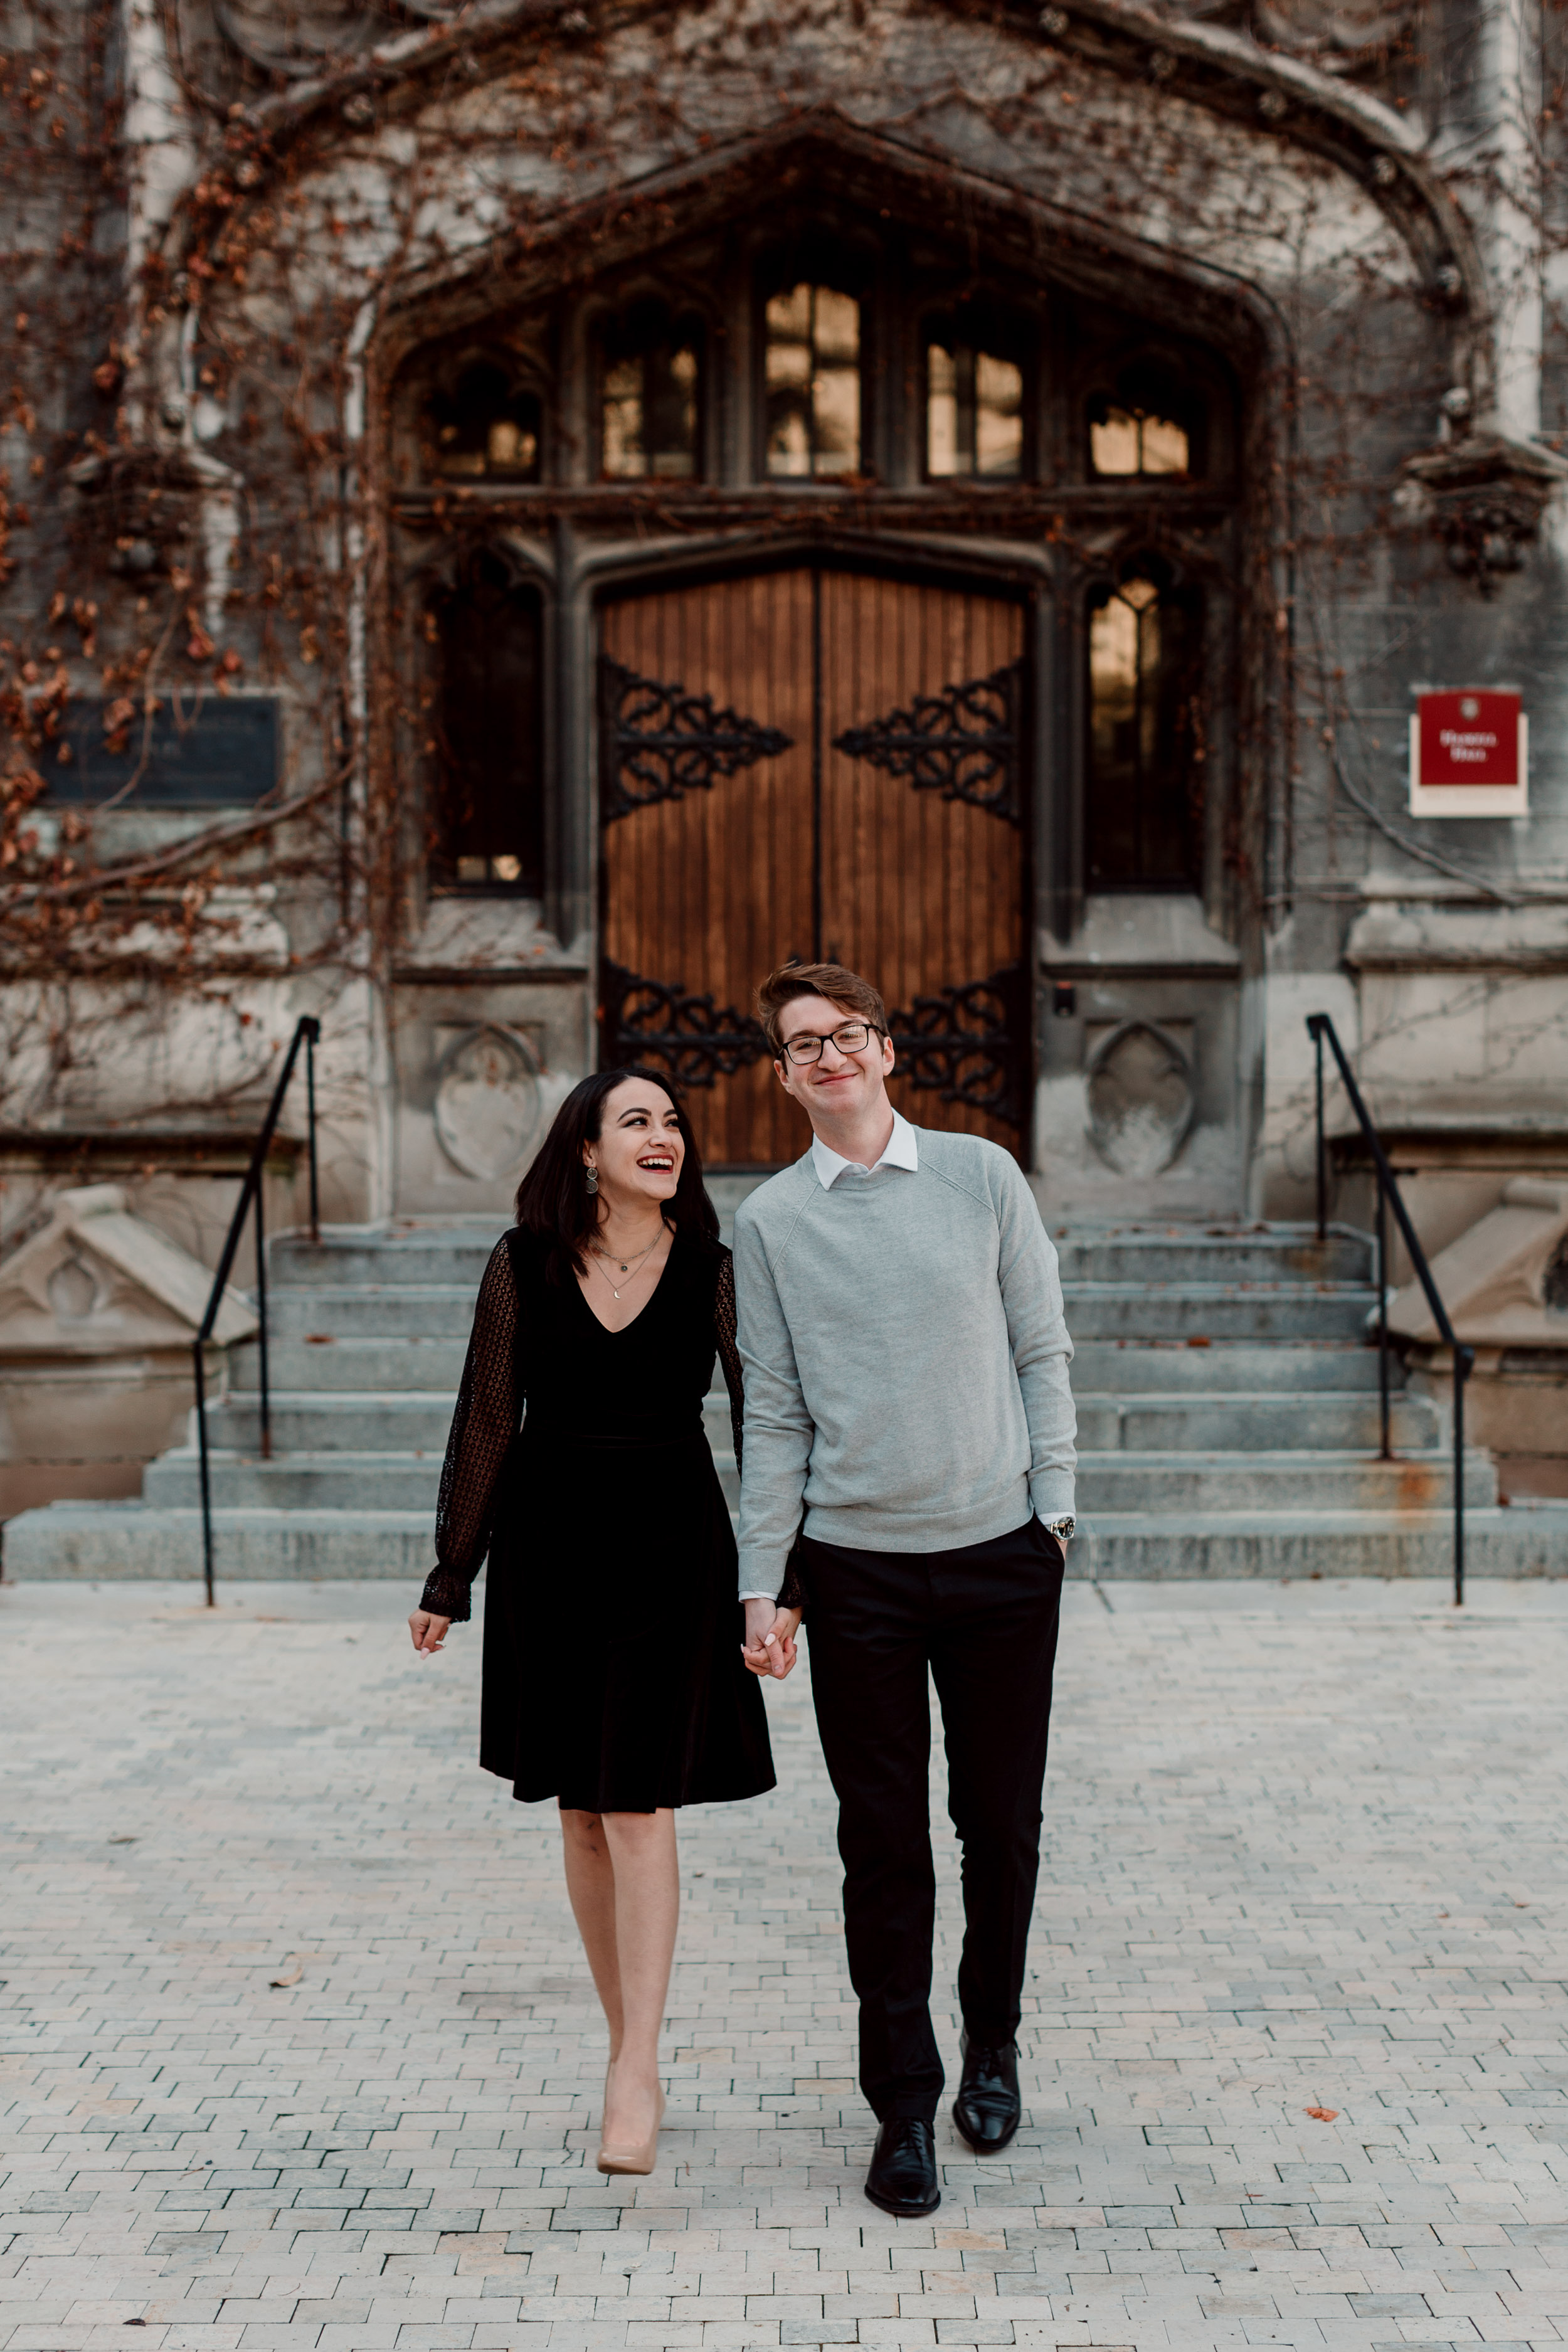 Engaged couple walking and laughing at engagement session | University of Chicago campus engagement session | Chicago engagement photographer | Chicago engagement photo locations | Winter engagement in Chicago | Where to take Chicago engagement photos | Chicago skyline engagement